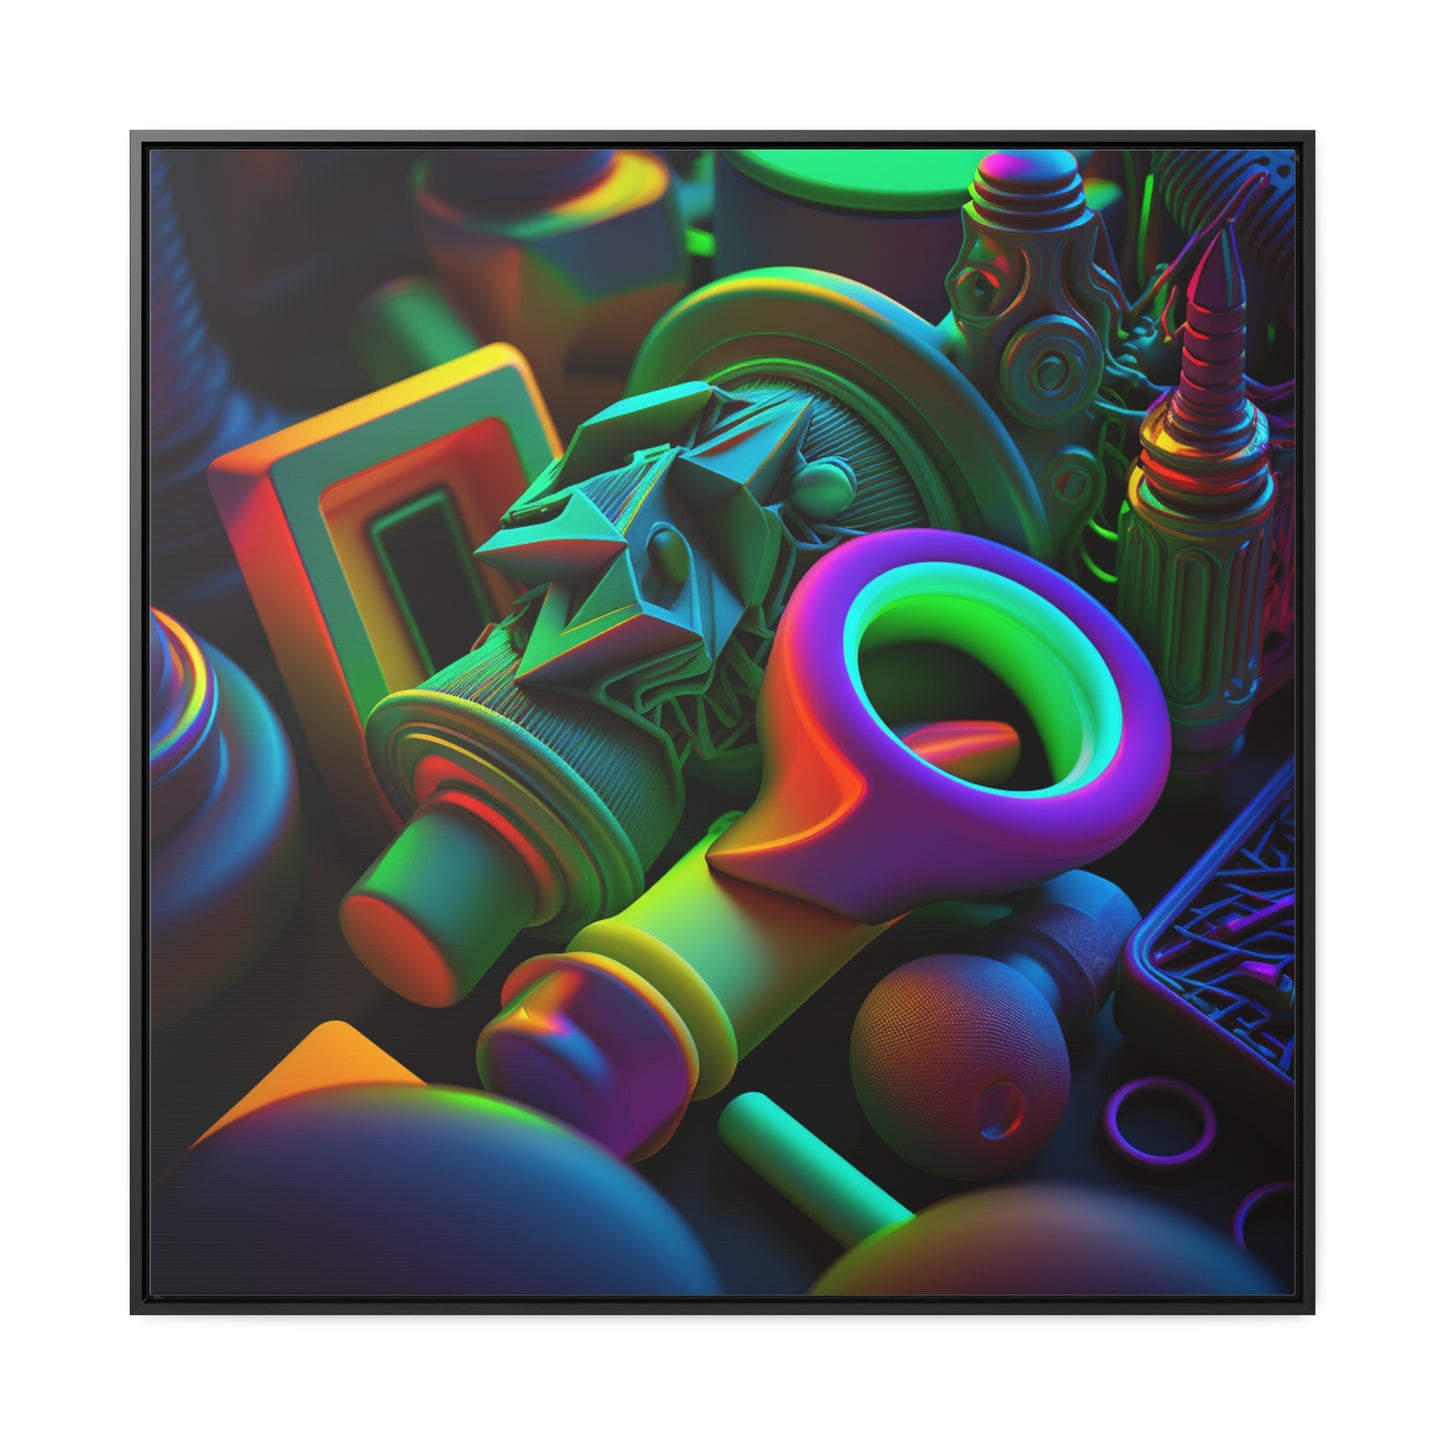 Gallery Canvas Wraps, Square Frame Neon Glow 2